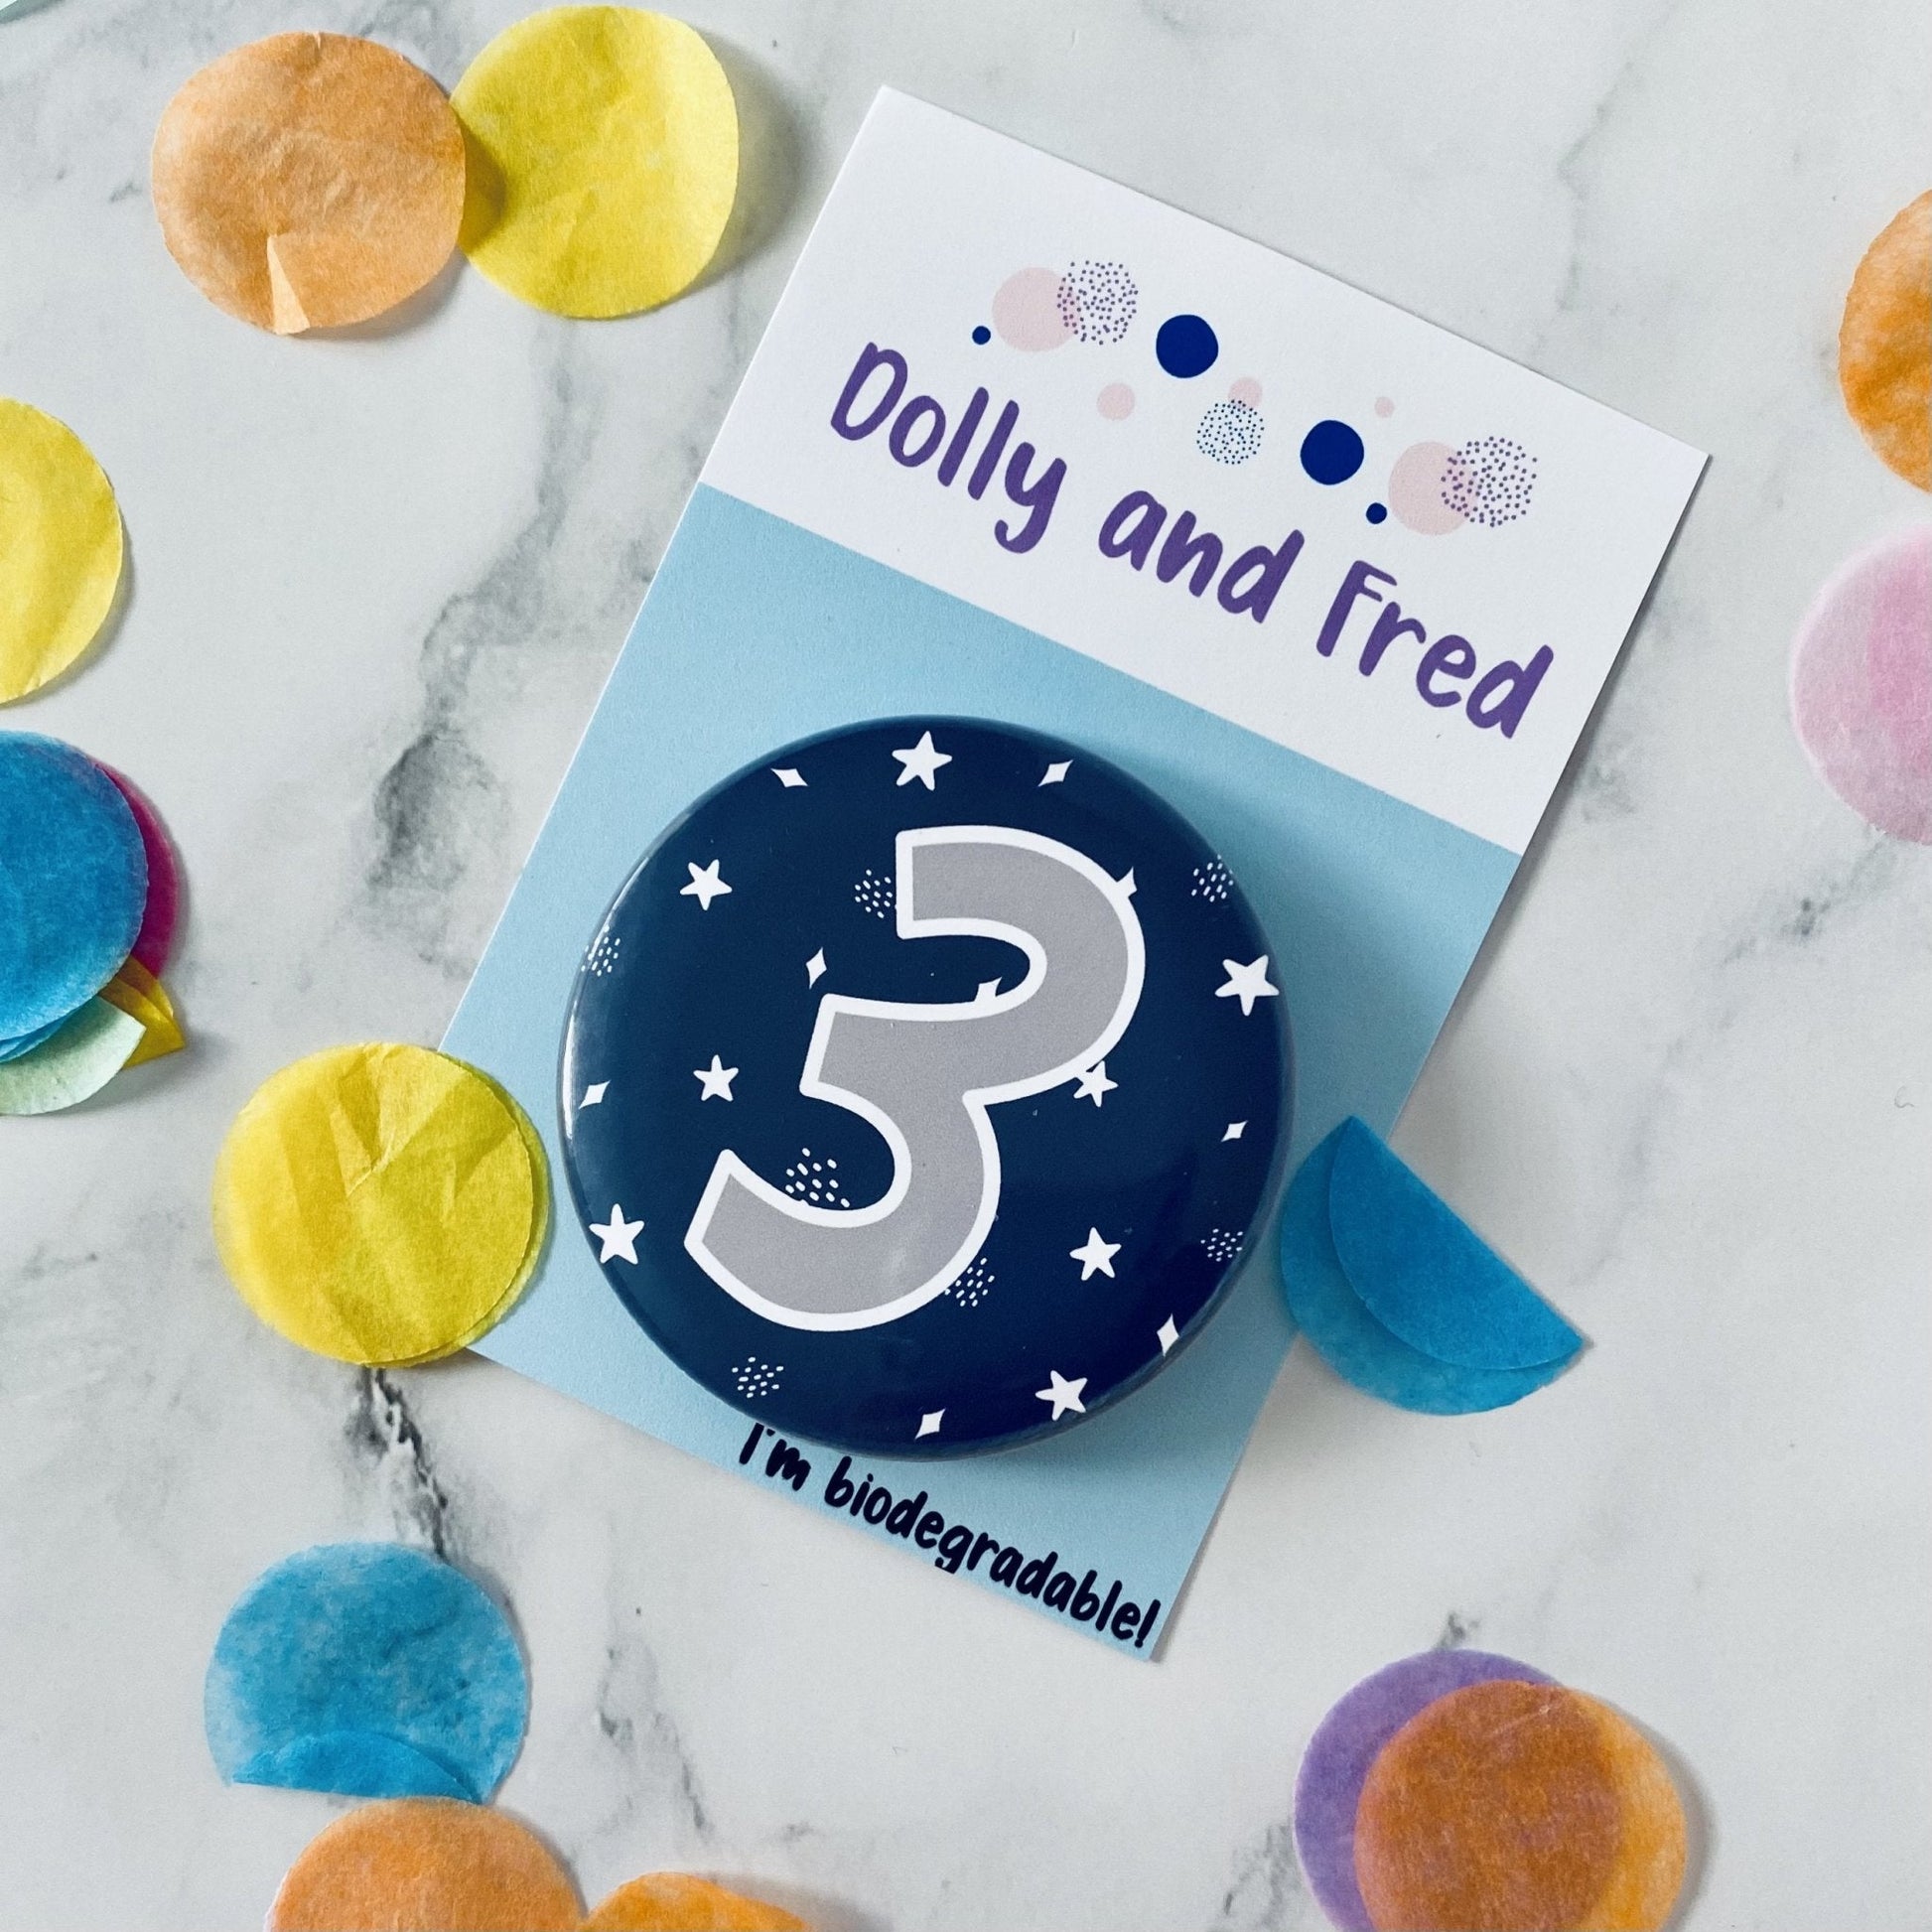 Navy Blue Number Badge - Dolly and Fred Designs